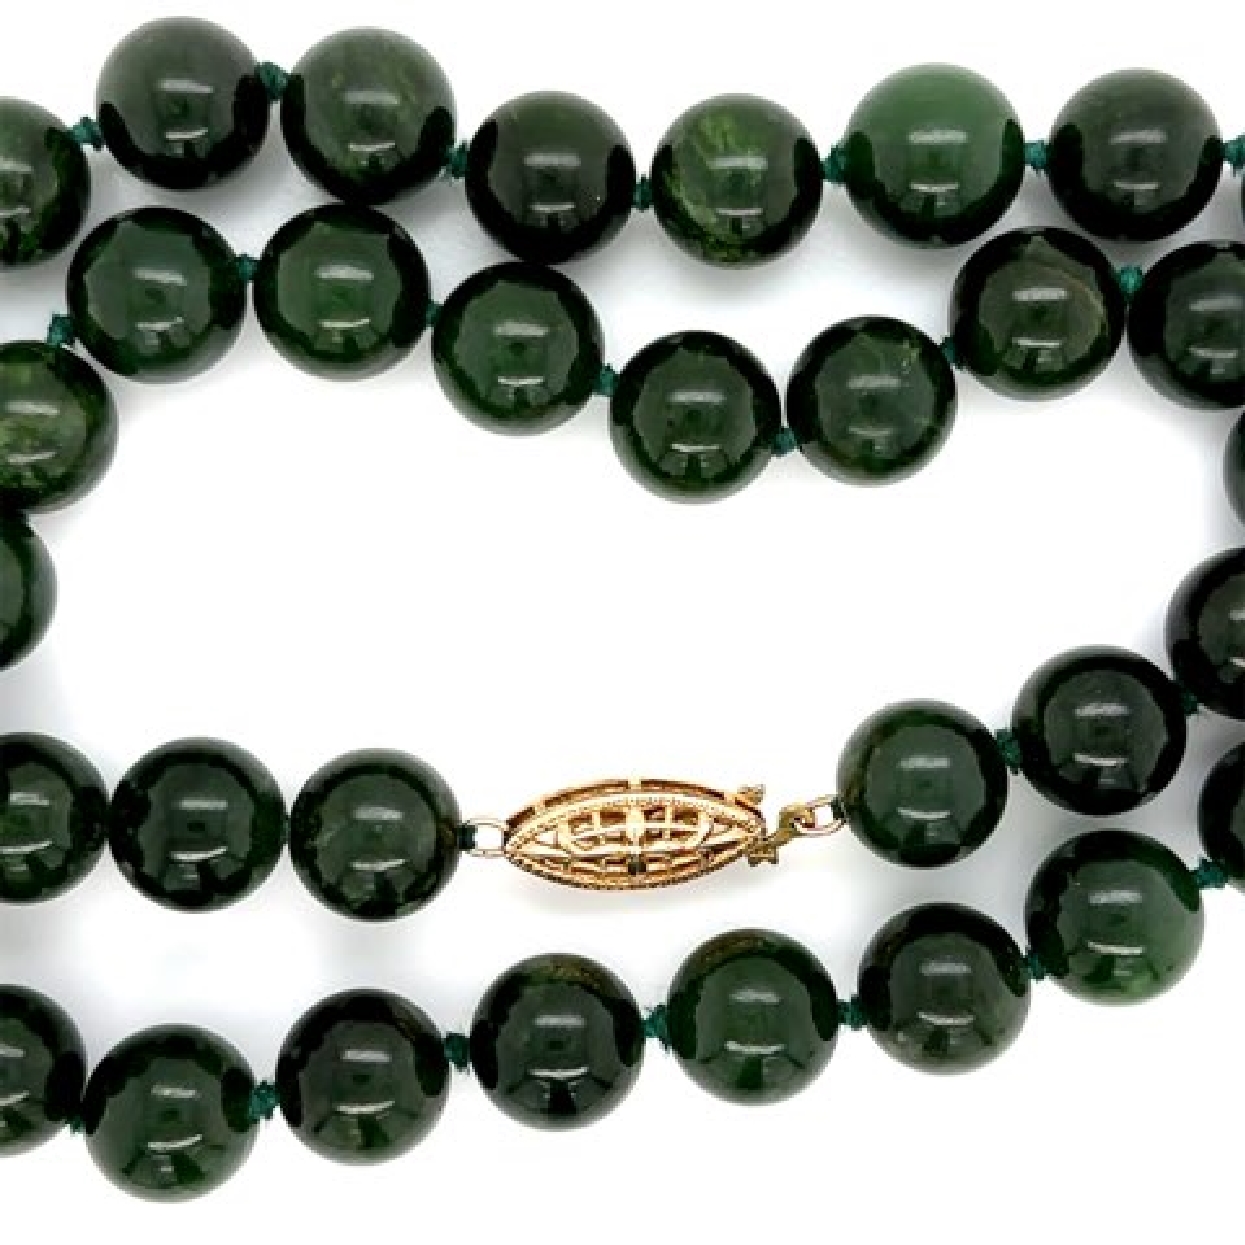 Nephrite Jade Beaded Necklace with 14K Yellow Gold Clasp

19 Inches